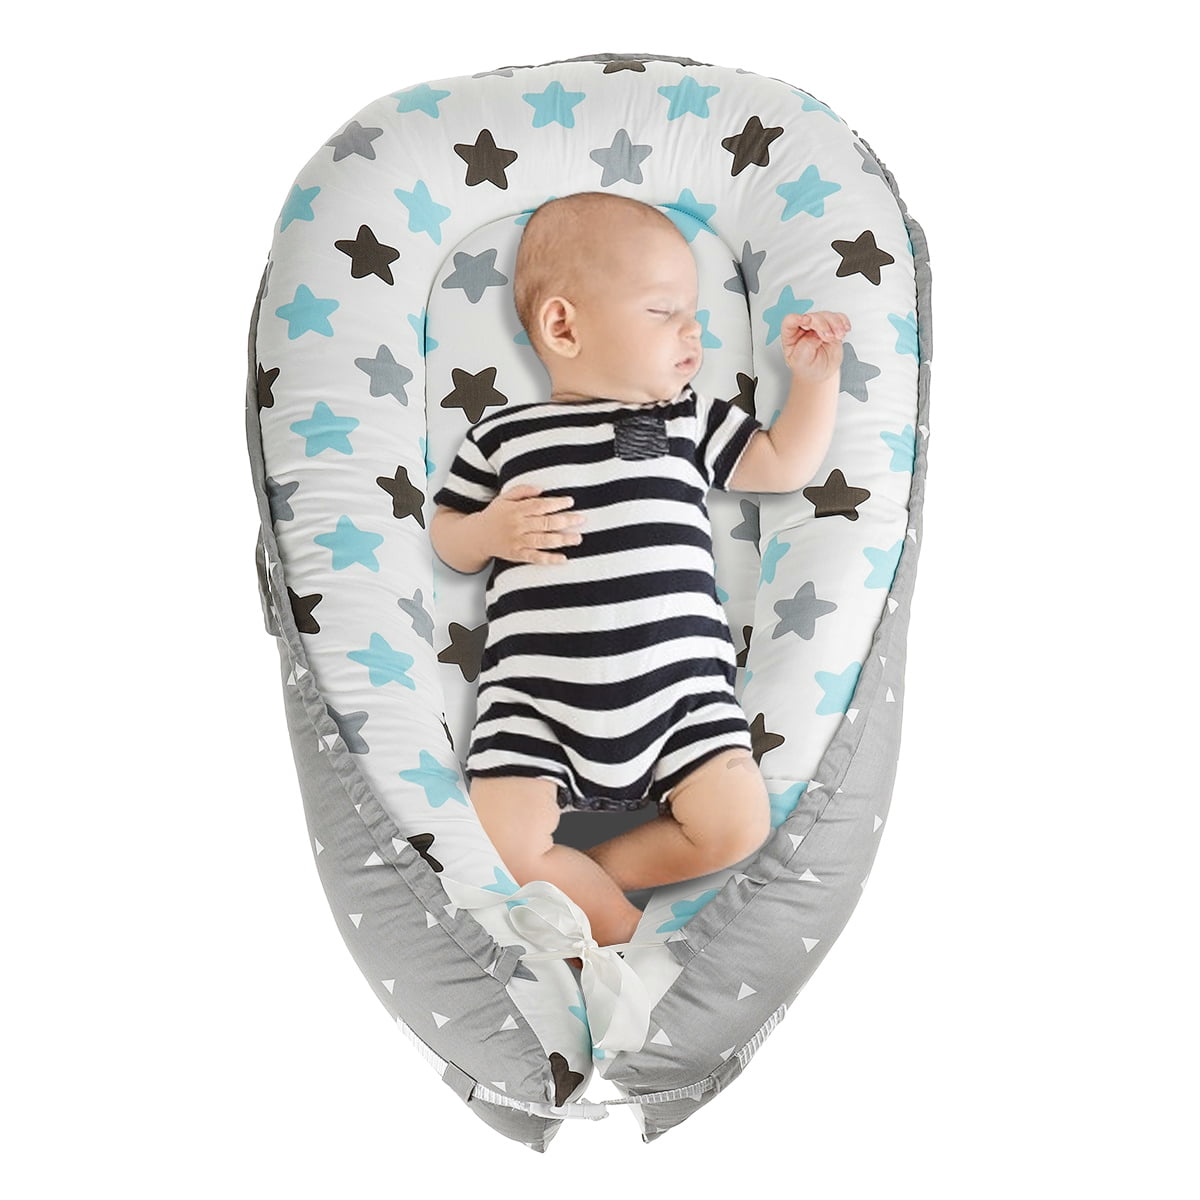 Super Soft Newborn Infant Cosleeping Baby Bed Bassinet Baby Lounger White & Gray 